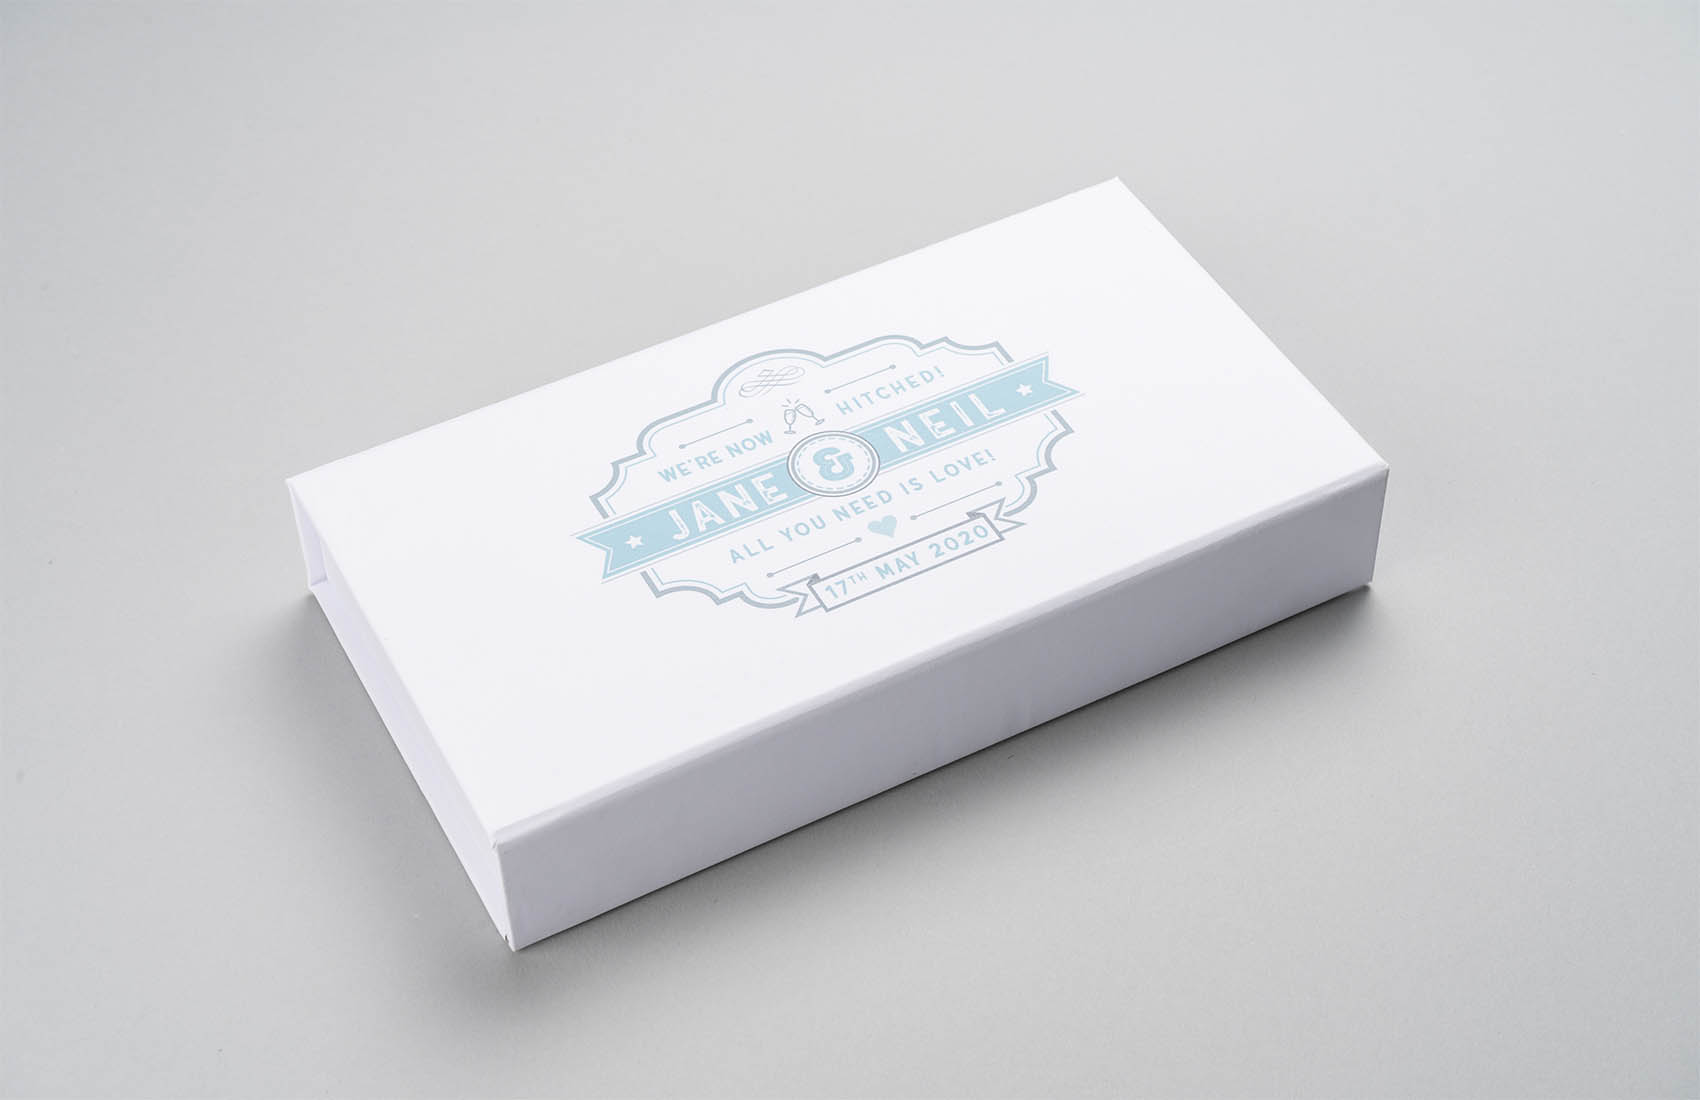 Personalised USB & Print Boxes